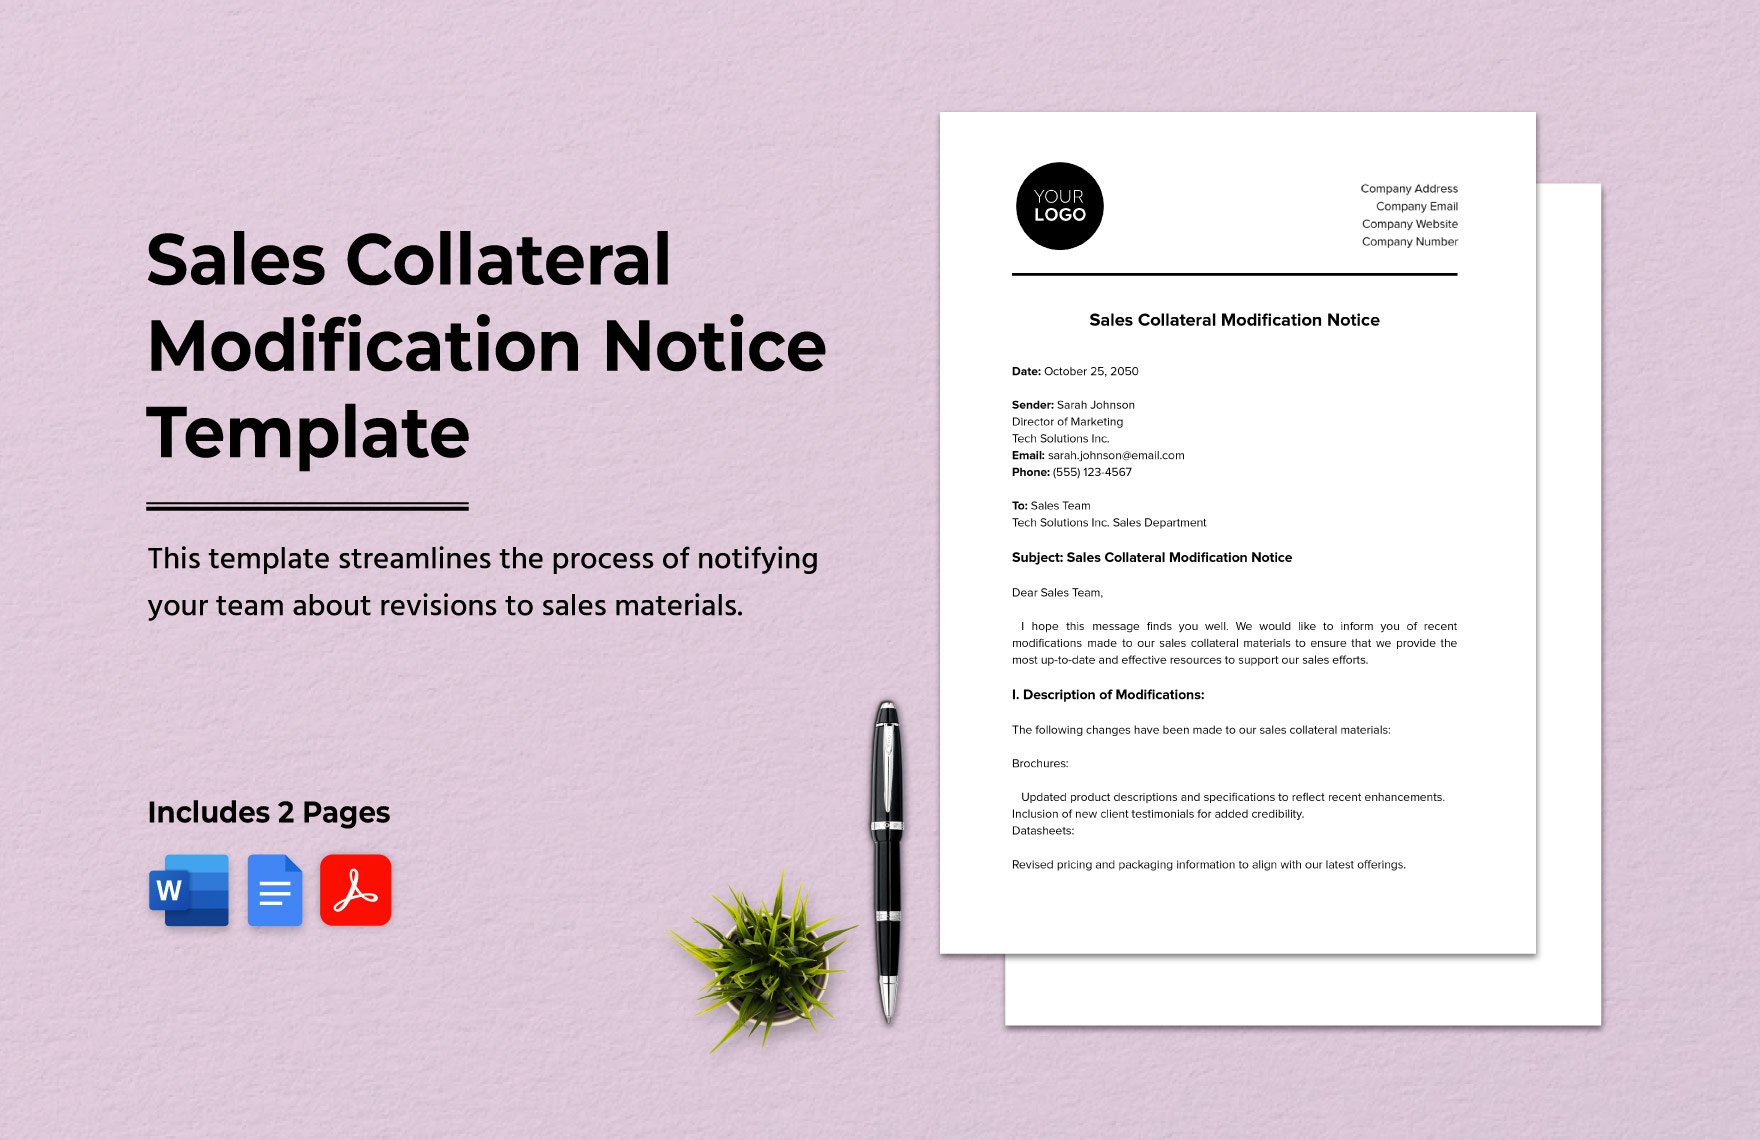 Sales Collateral Modification Notice Template